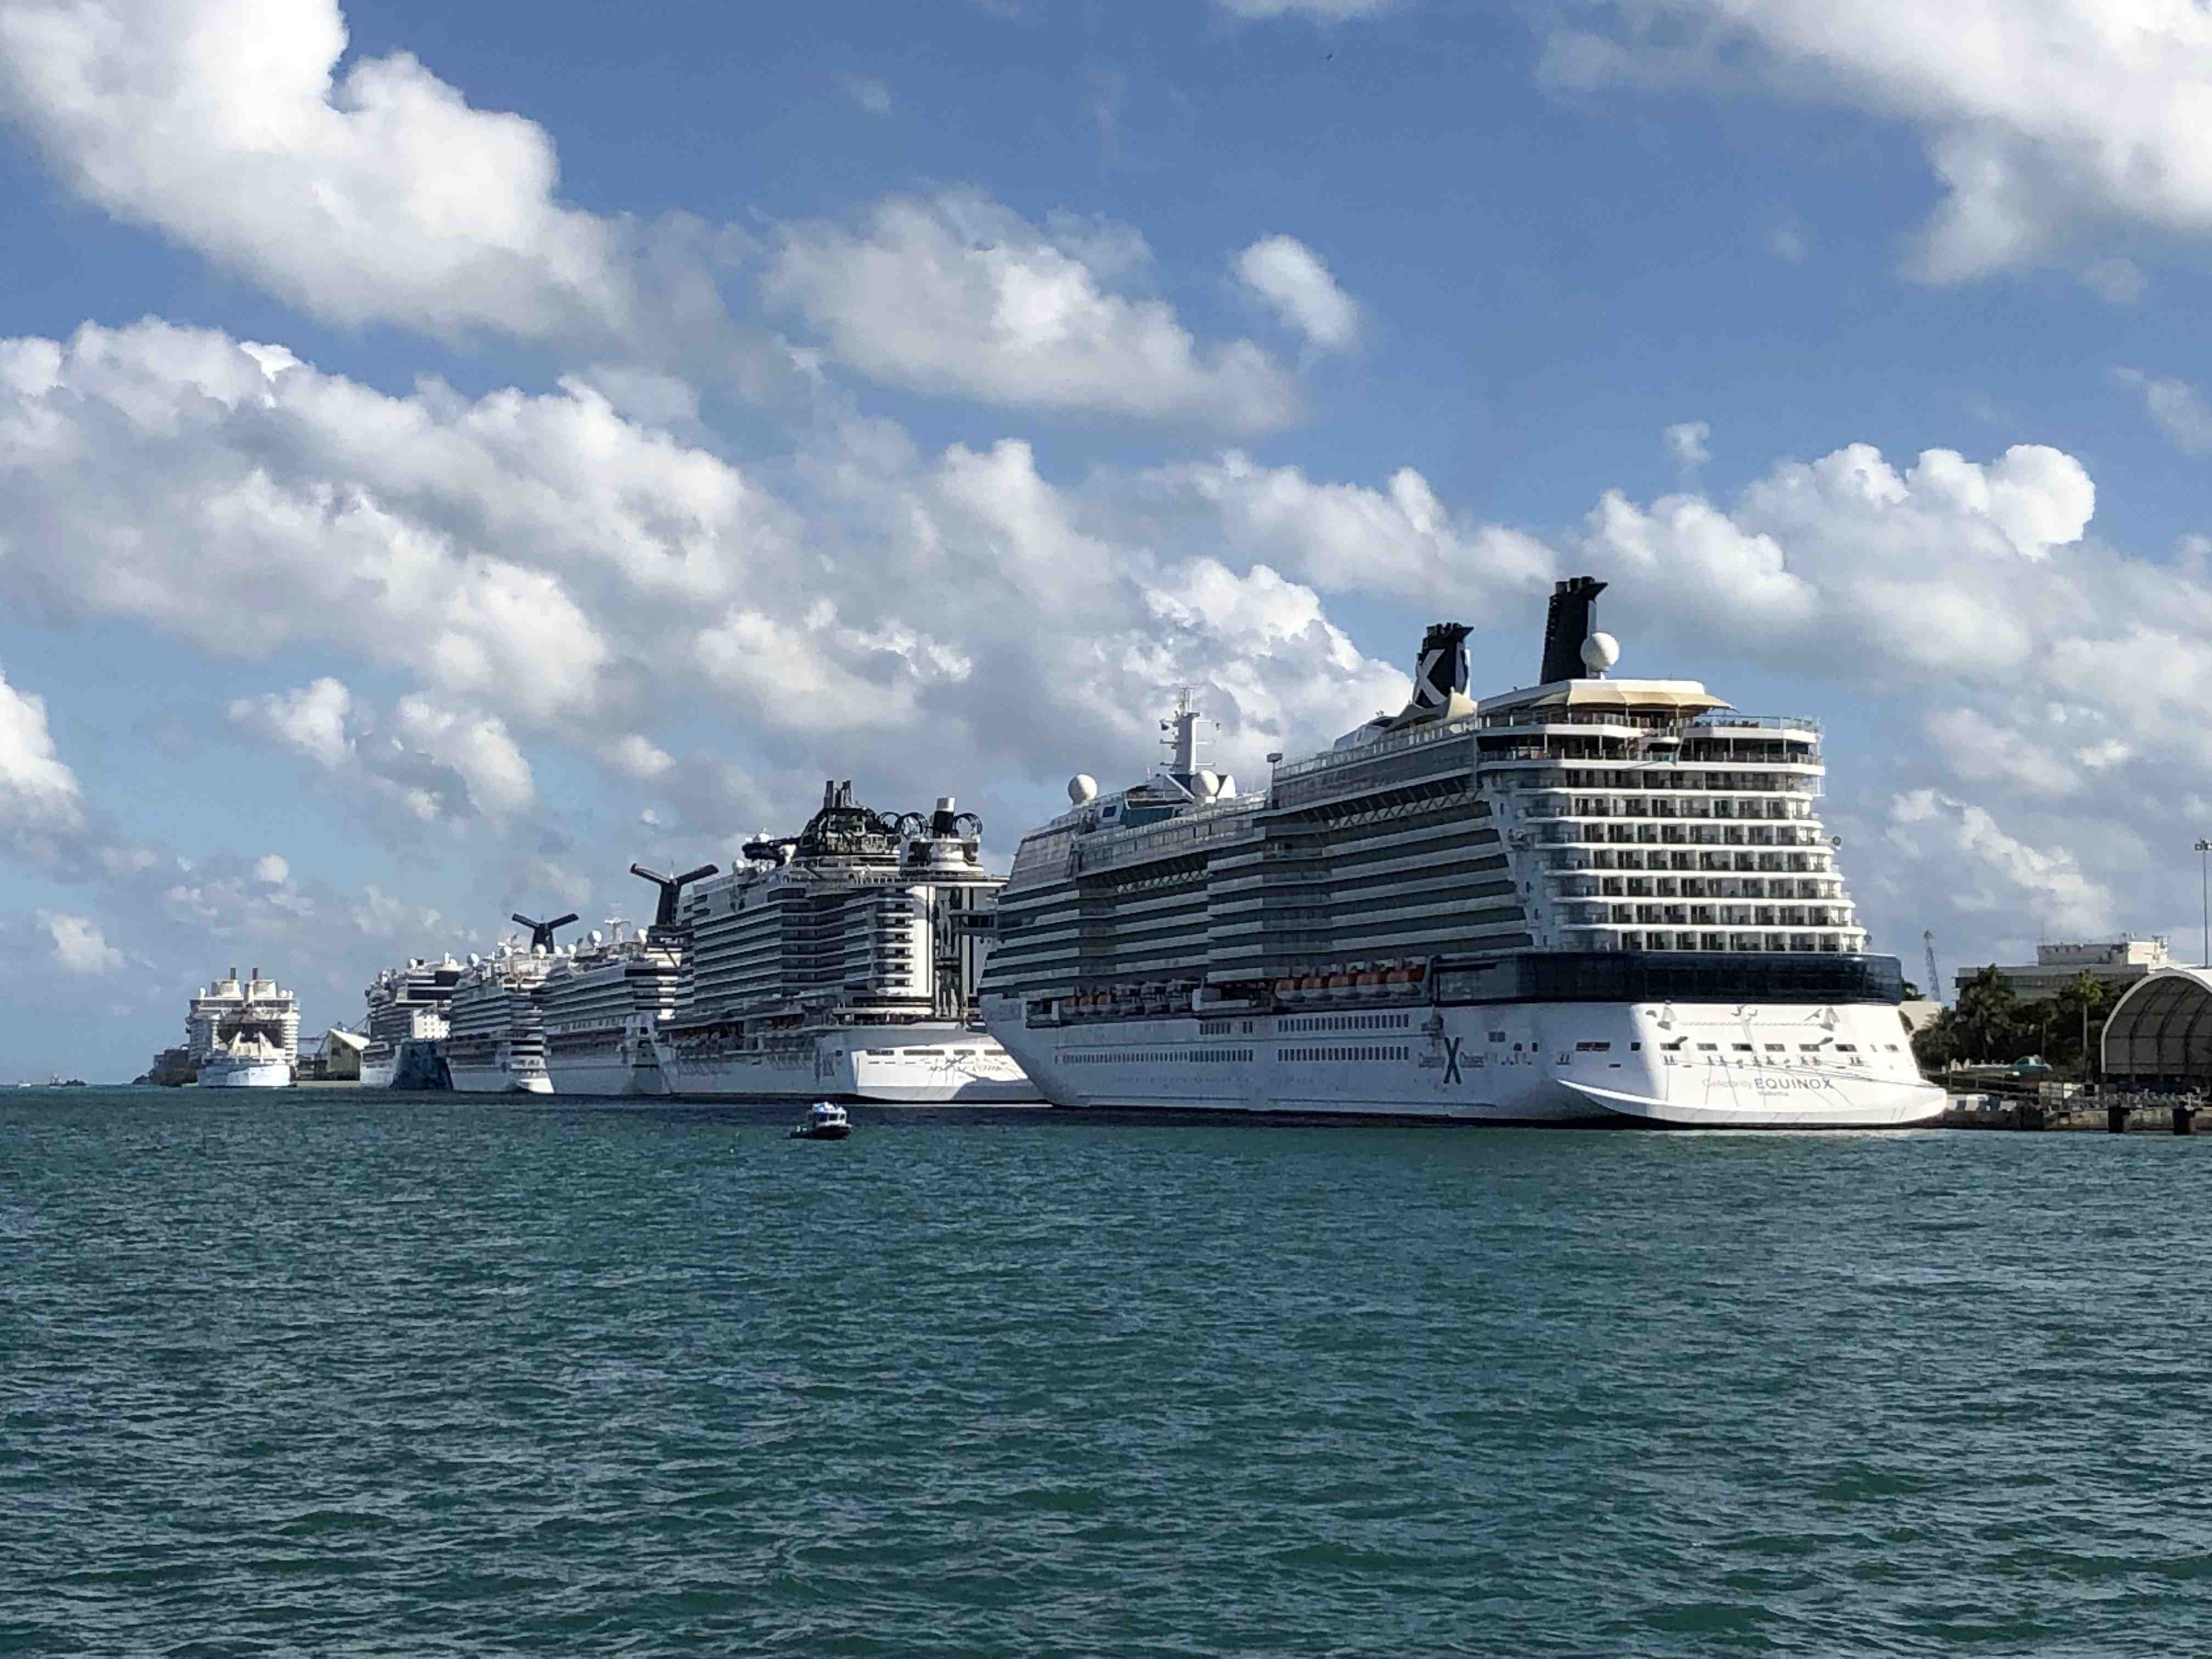 Toured the Port of Miami with seven cruisers docked today.   Currently the largest in the world, Symphony of Seas was preparing for its next excursion.